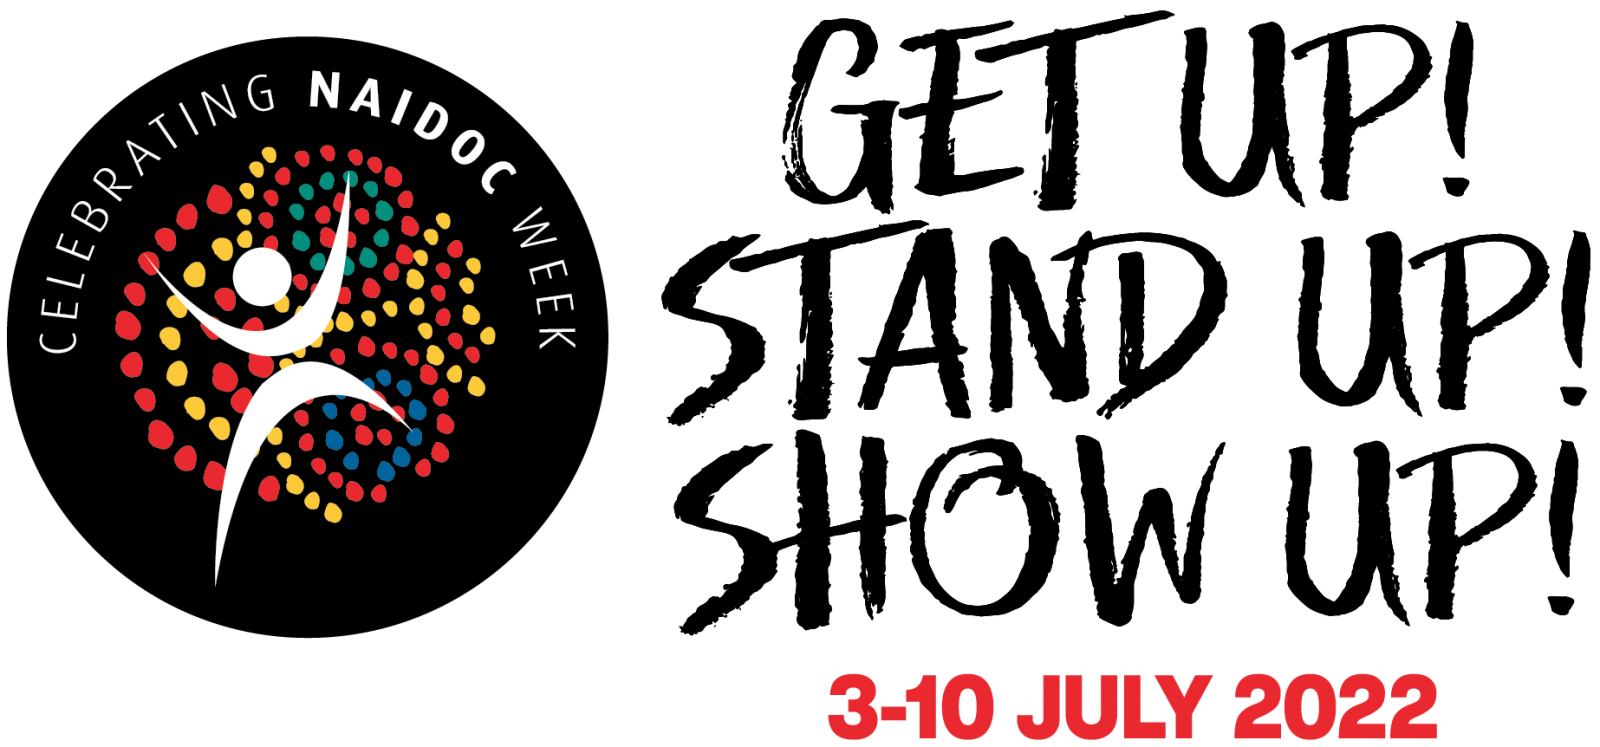 NAIDOC Week – What it is and why it matters